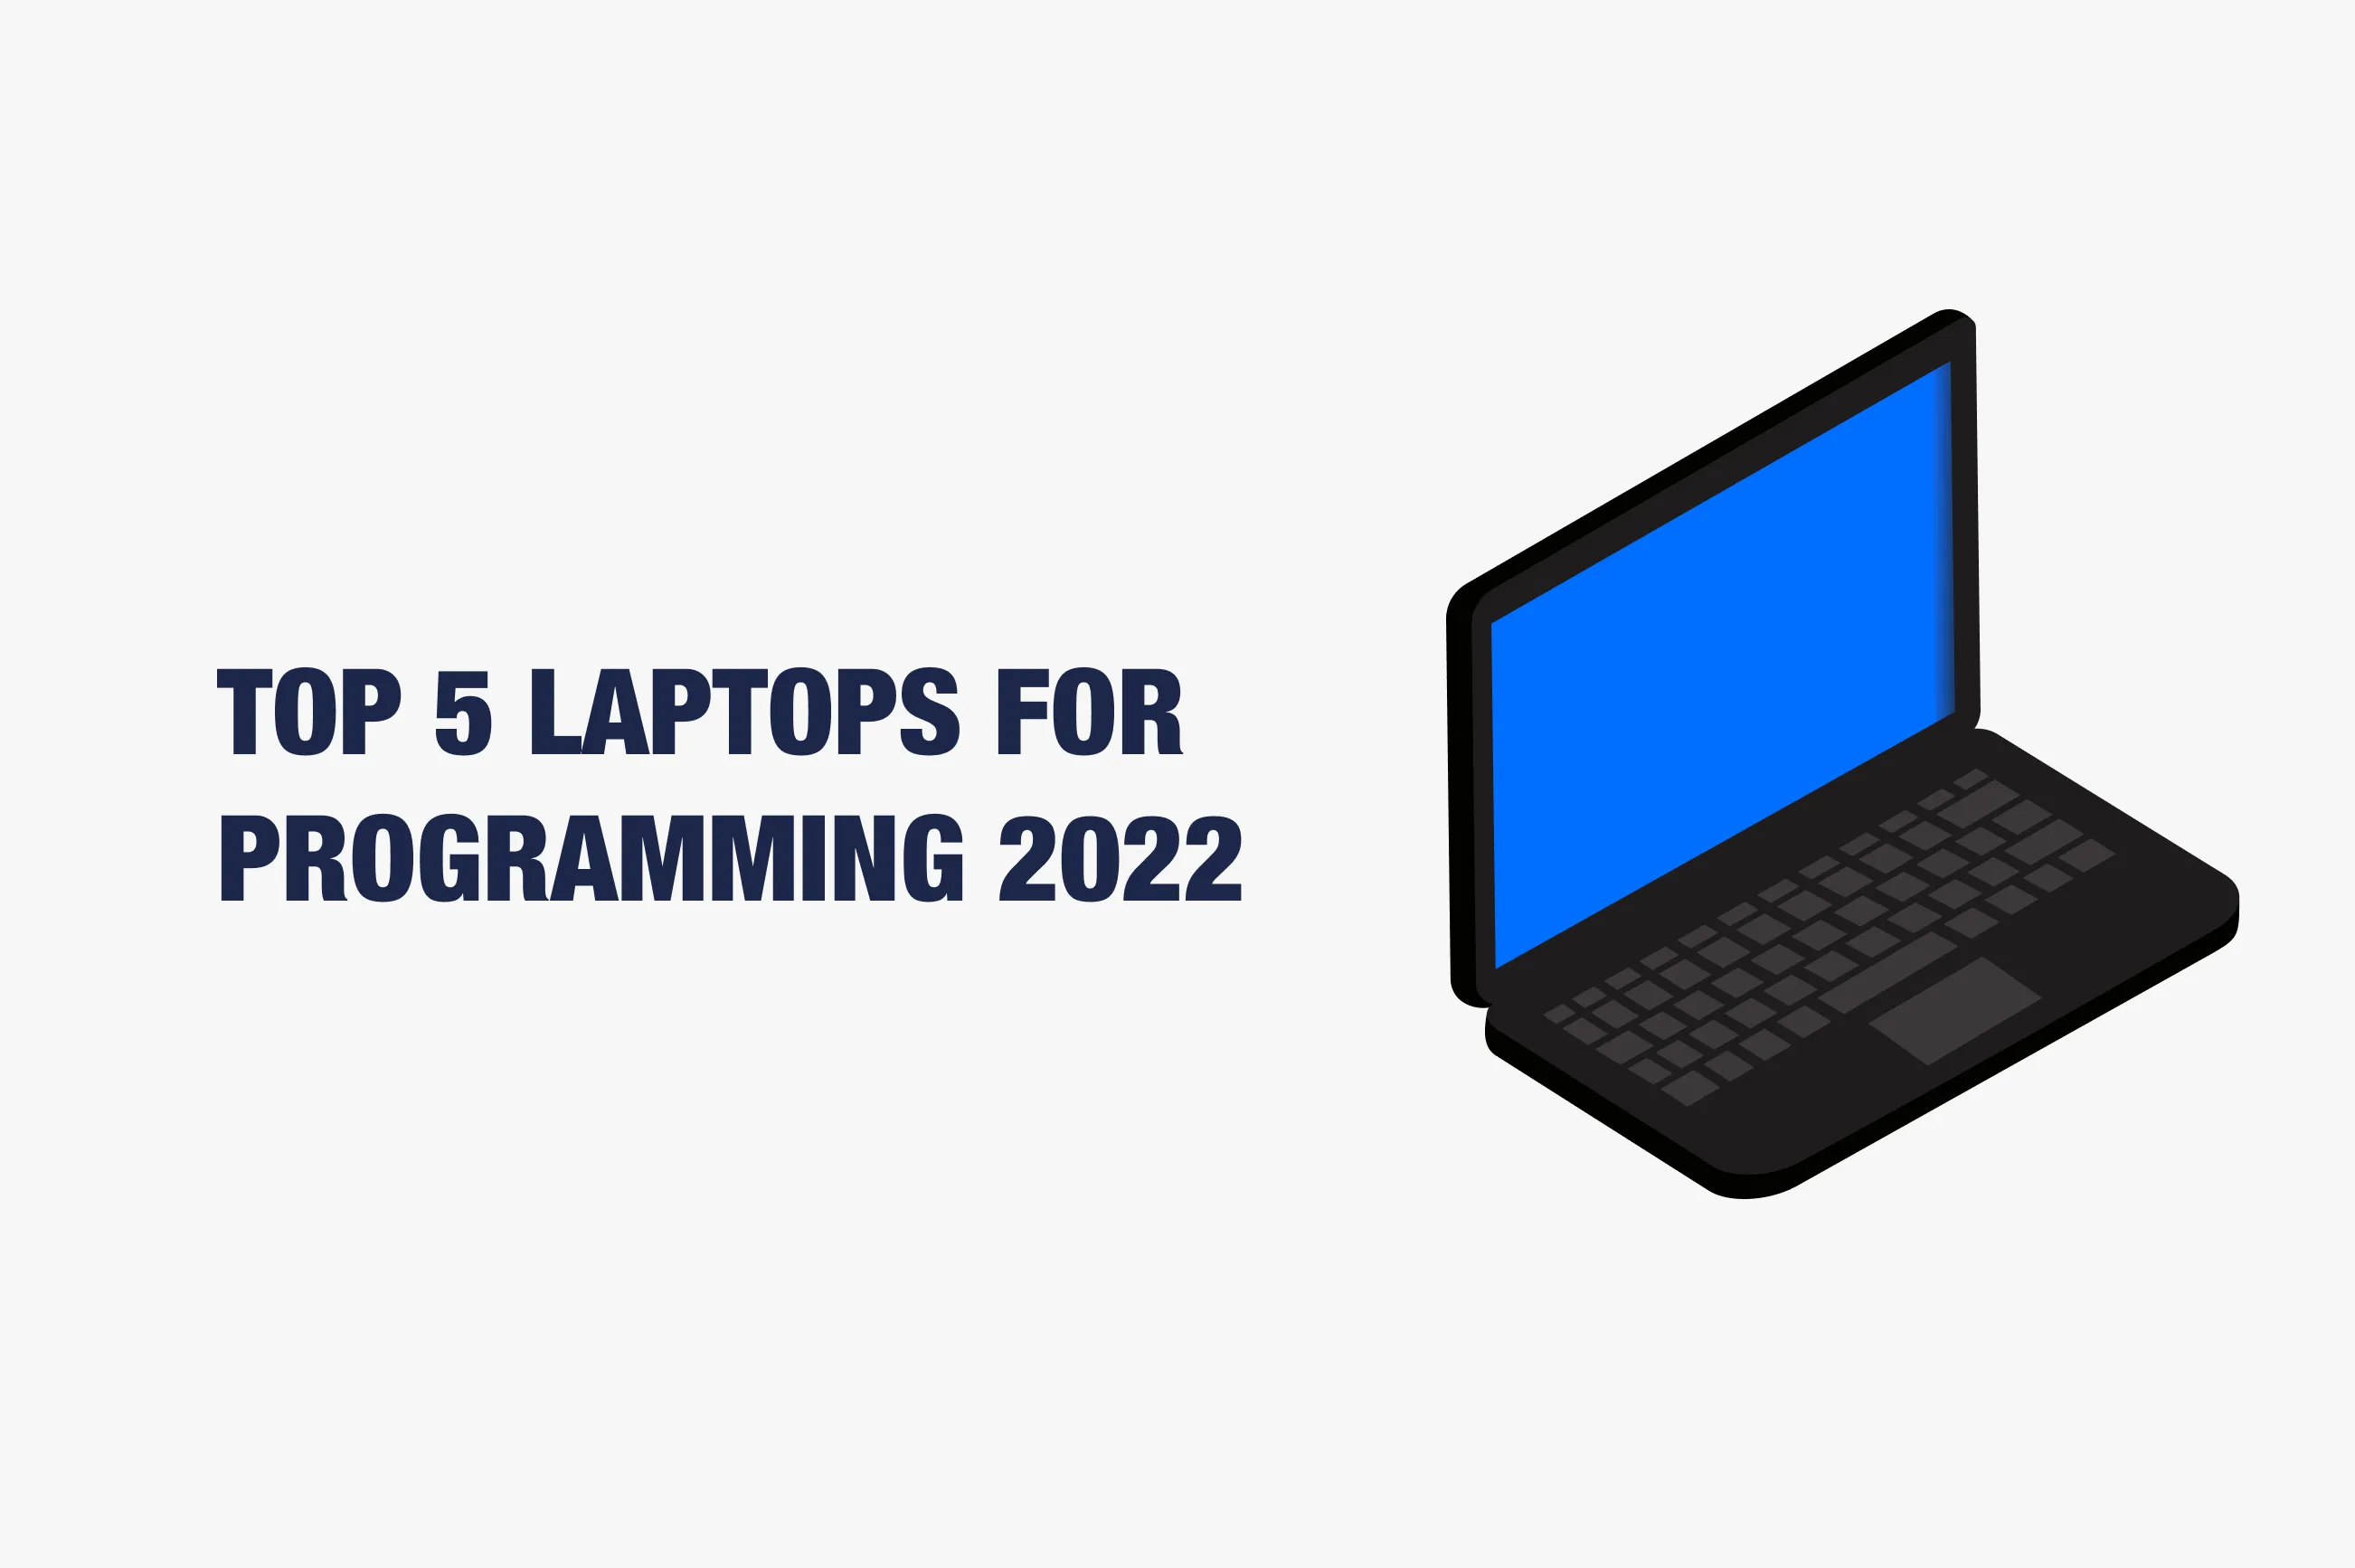 How to Choose a Laptop for Programming?